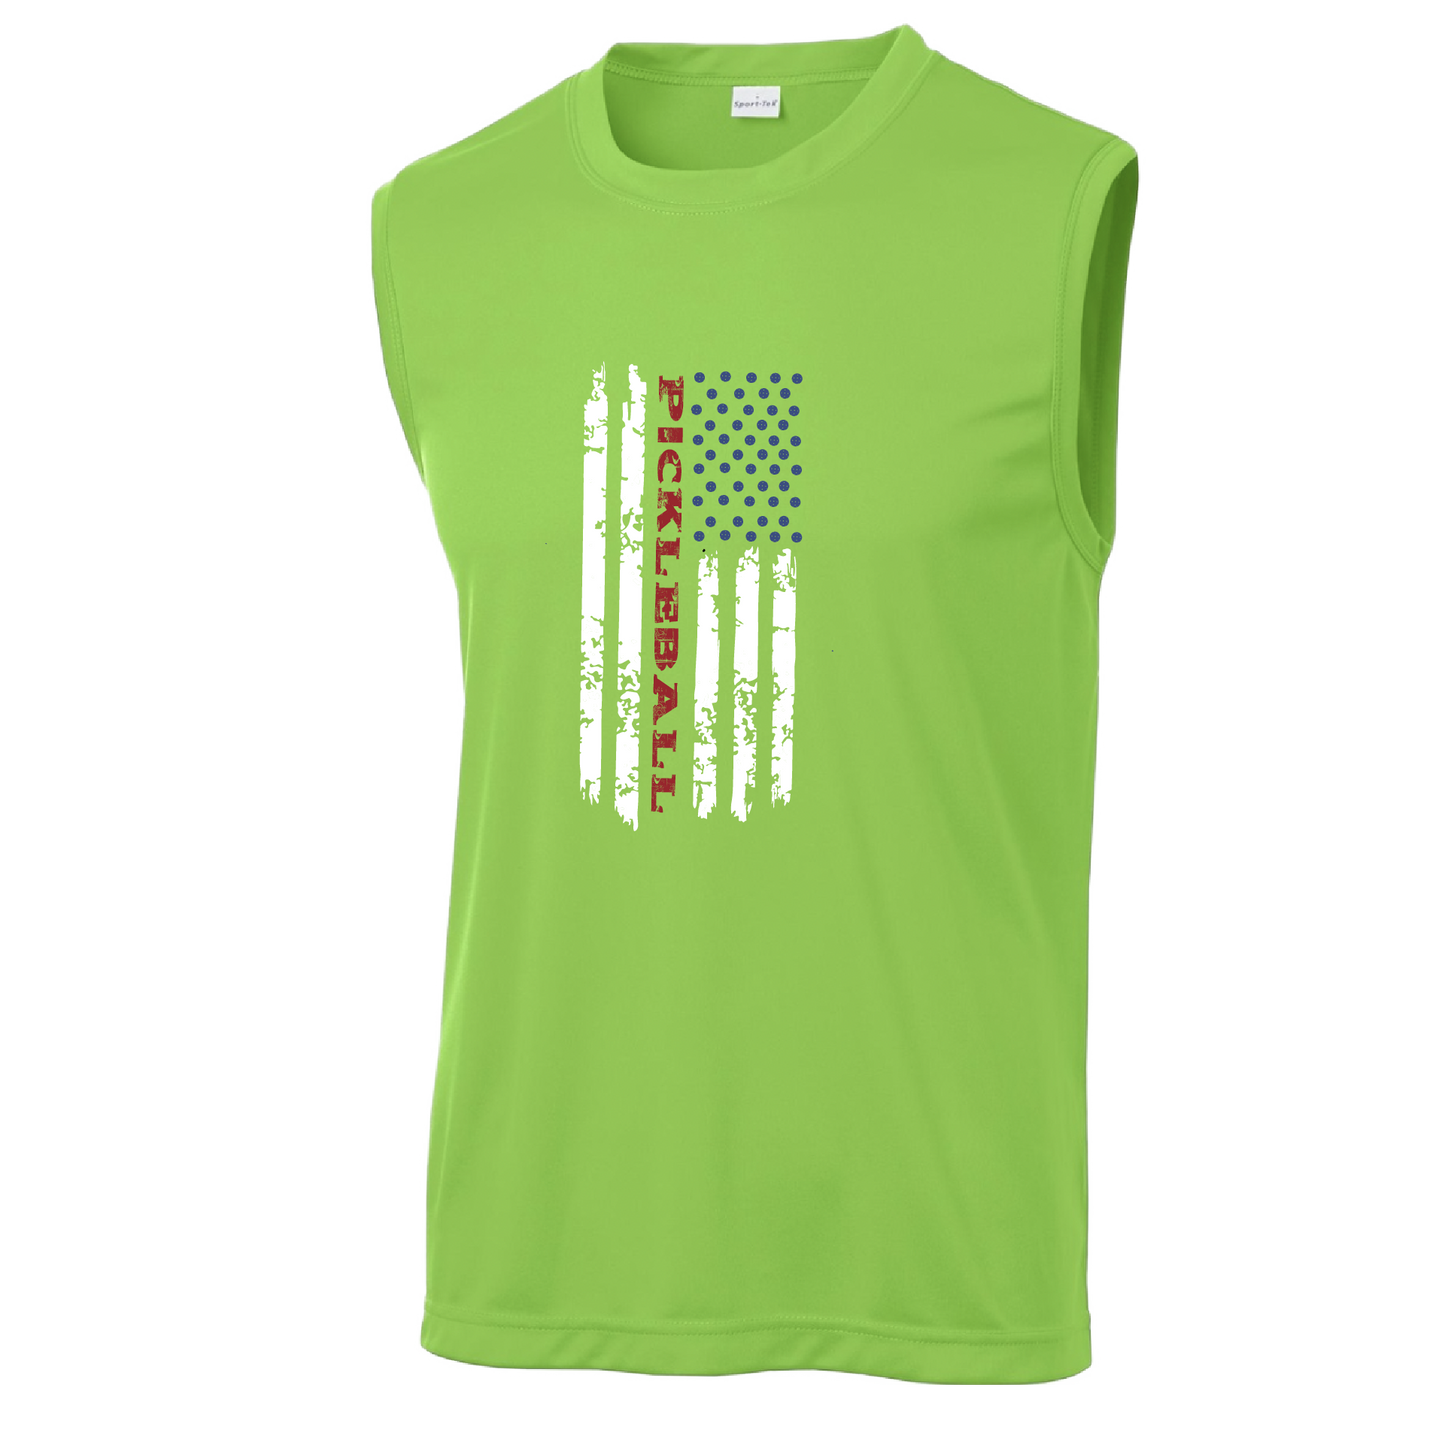 Pickleball Design: Pickleball Vertical Flag on Front or Back Shirt  Men's Styles: Sleeveless  Shirts are lightweight, roomy and highly breathable. These moisture-wicking shirts are designed for athletic performance. They feature PosiCharge technology to lock in color and prevent logos from fading. Removable tag and set-in sleeves for comfort.